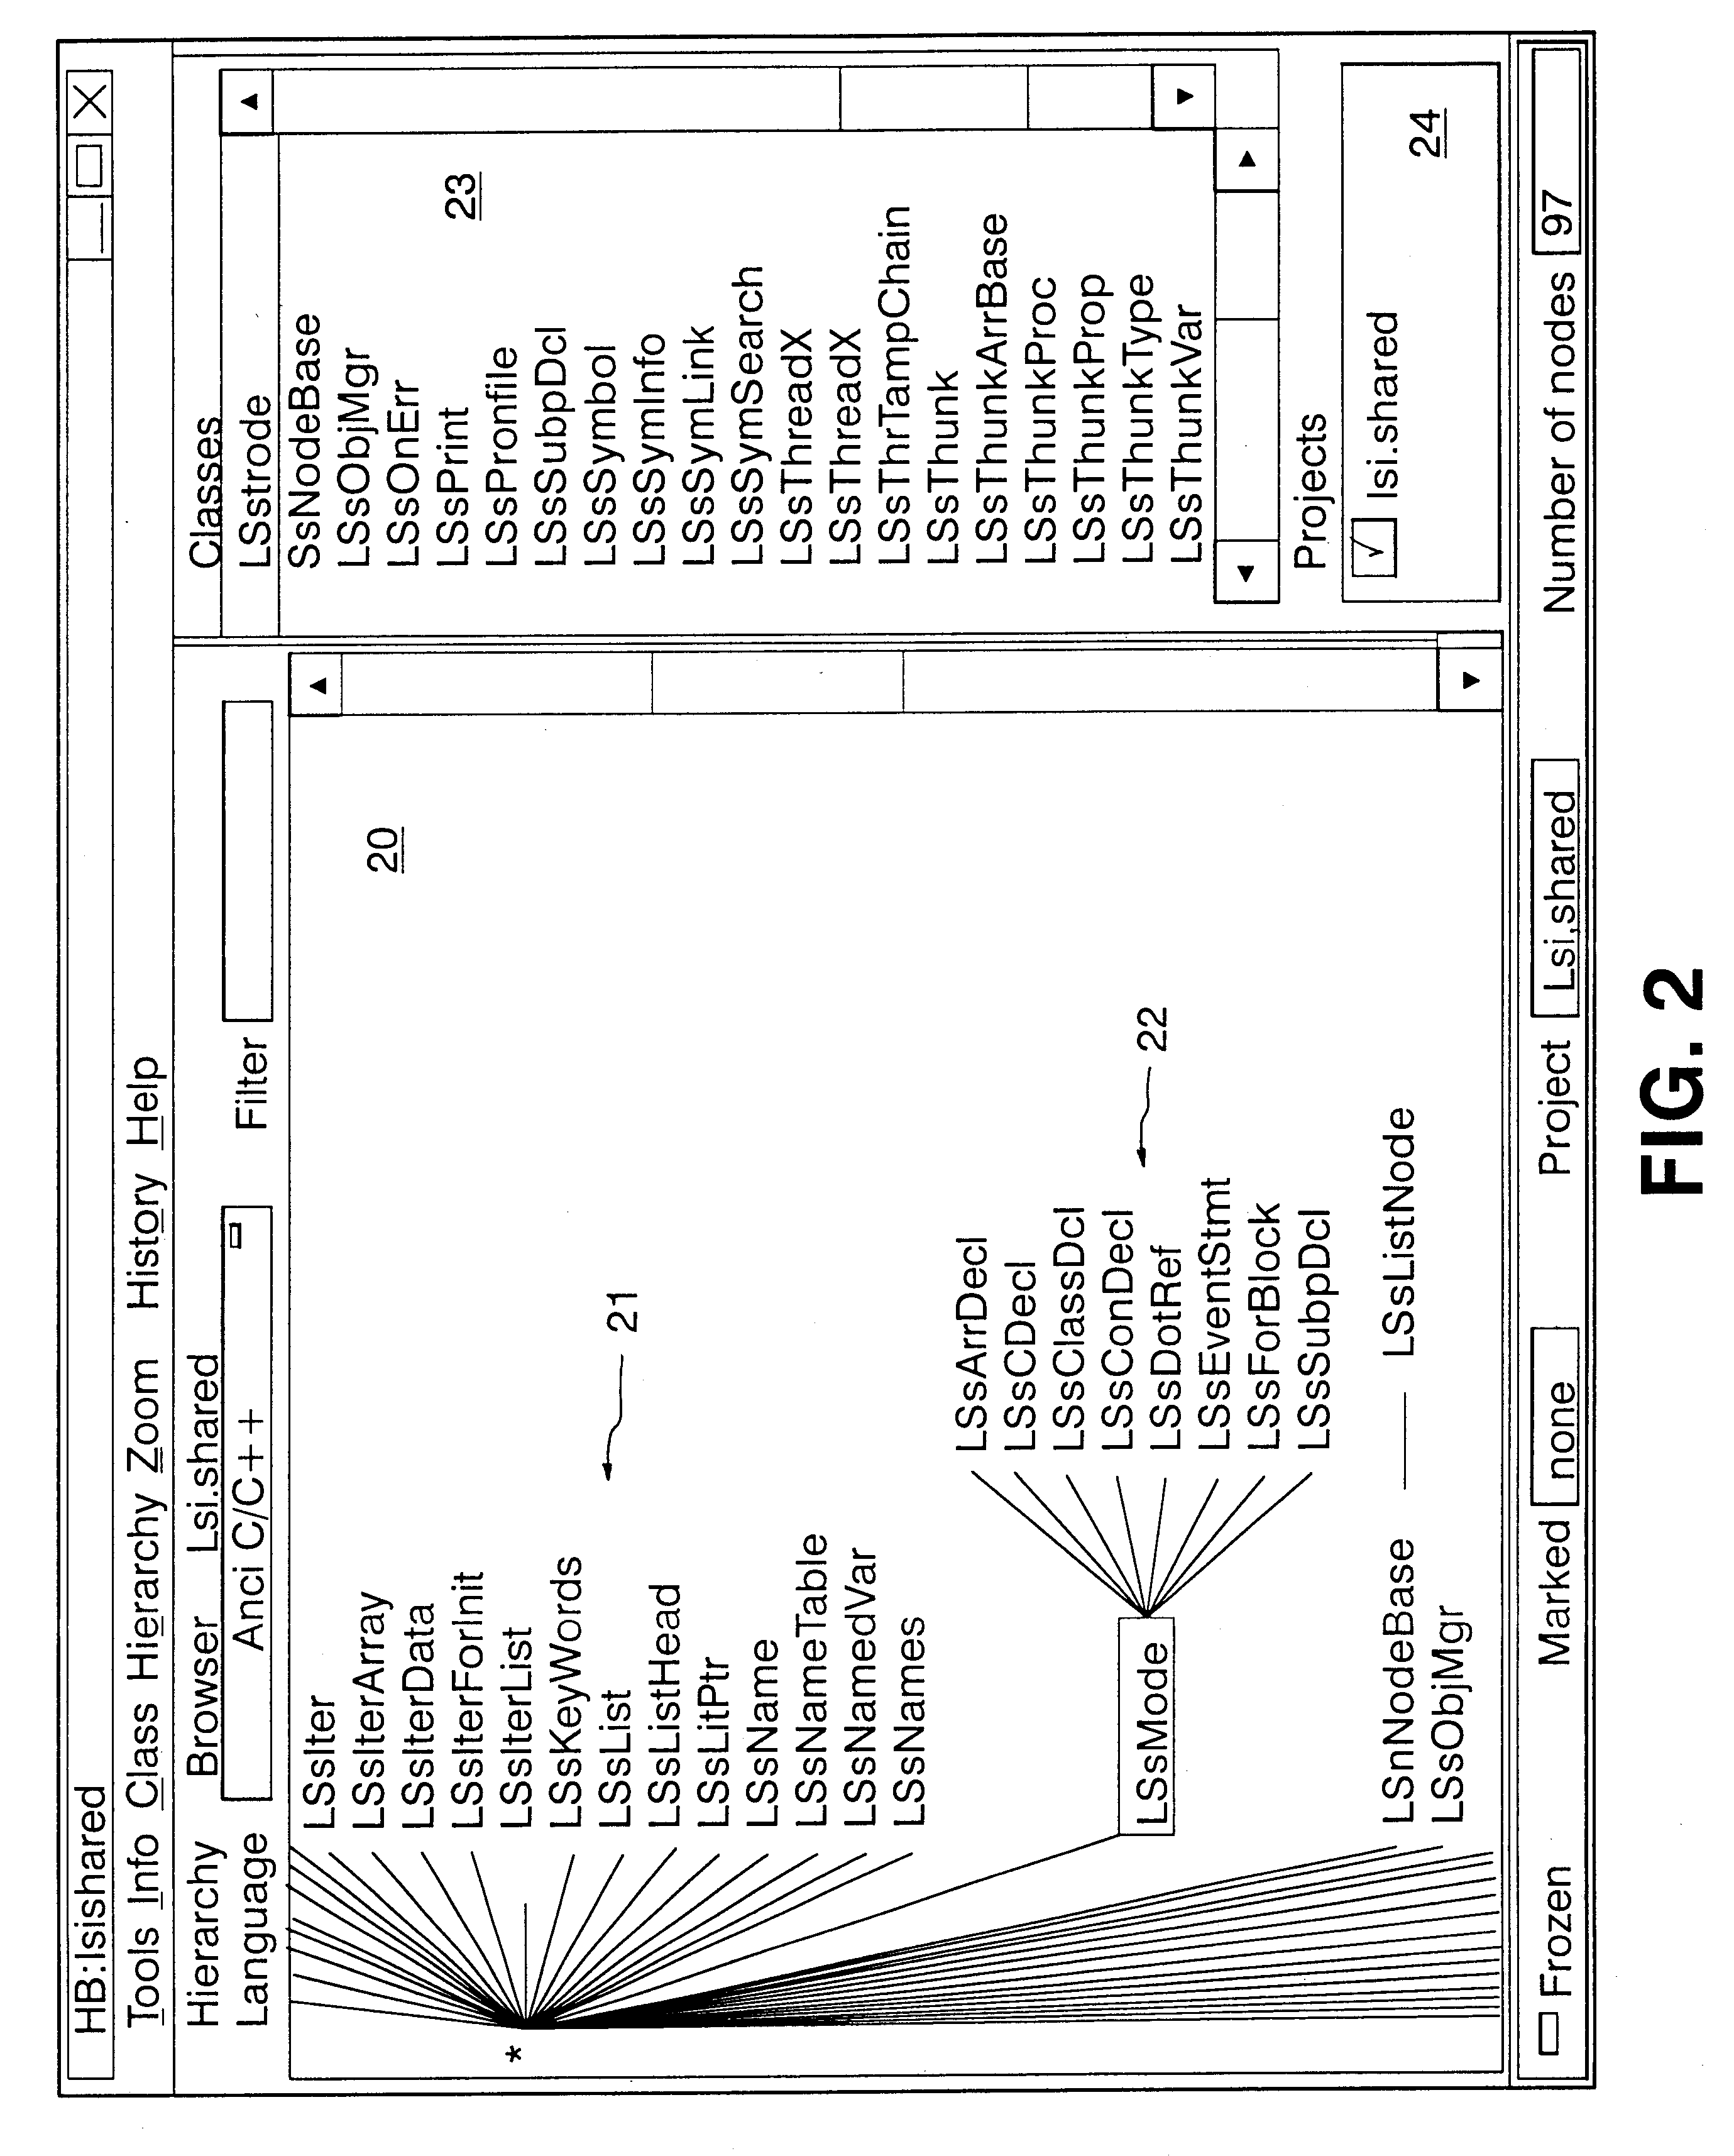 Method and system for analyzing and displaying program information